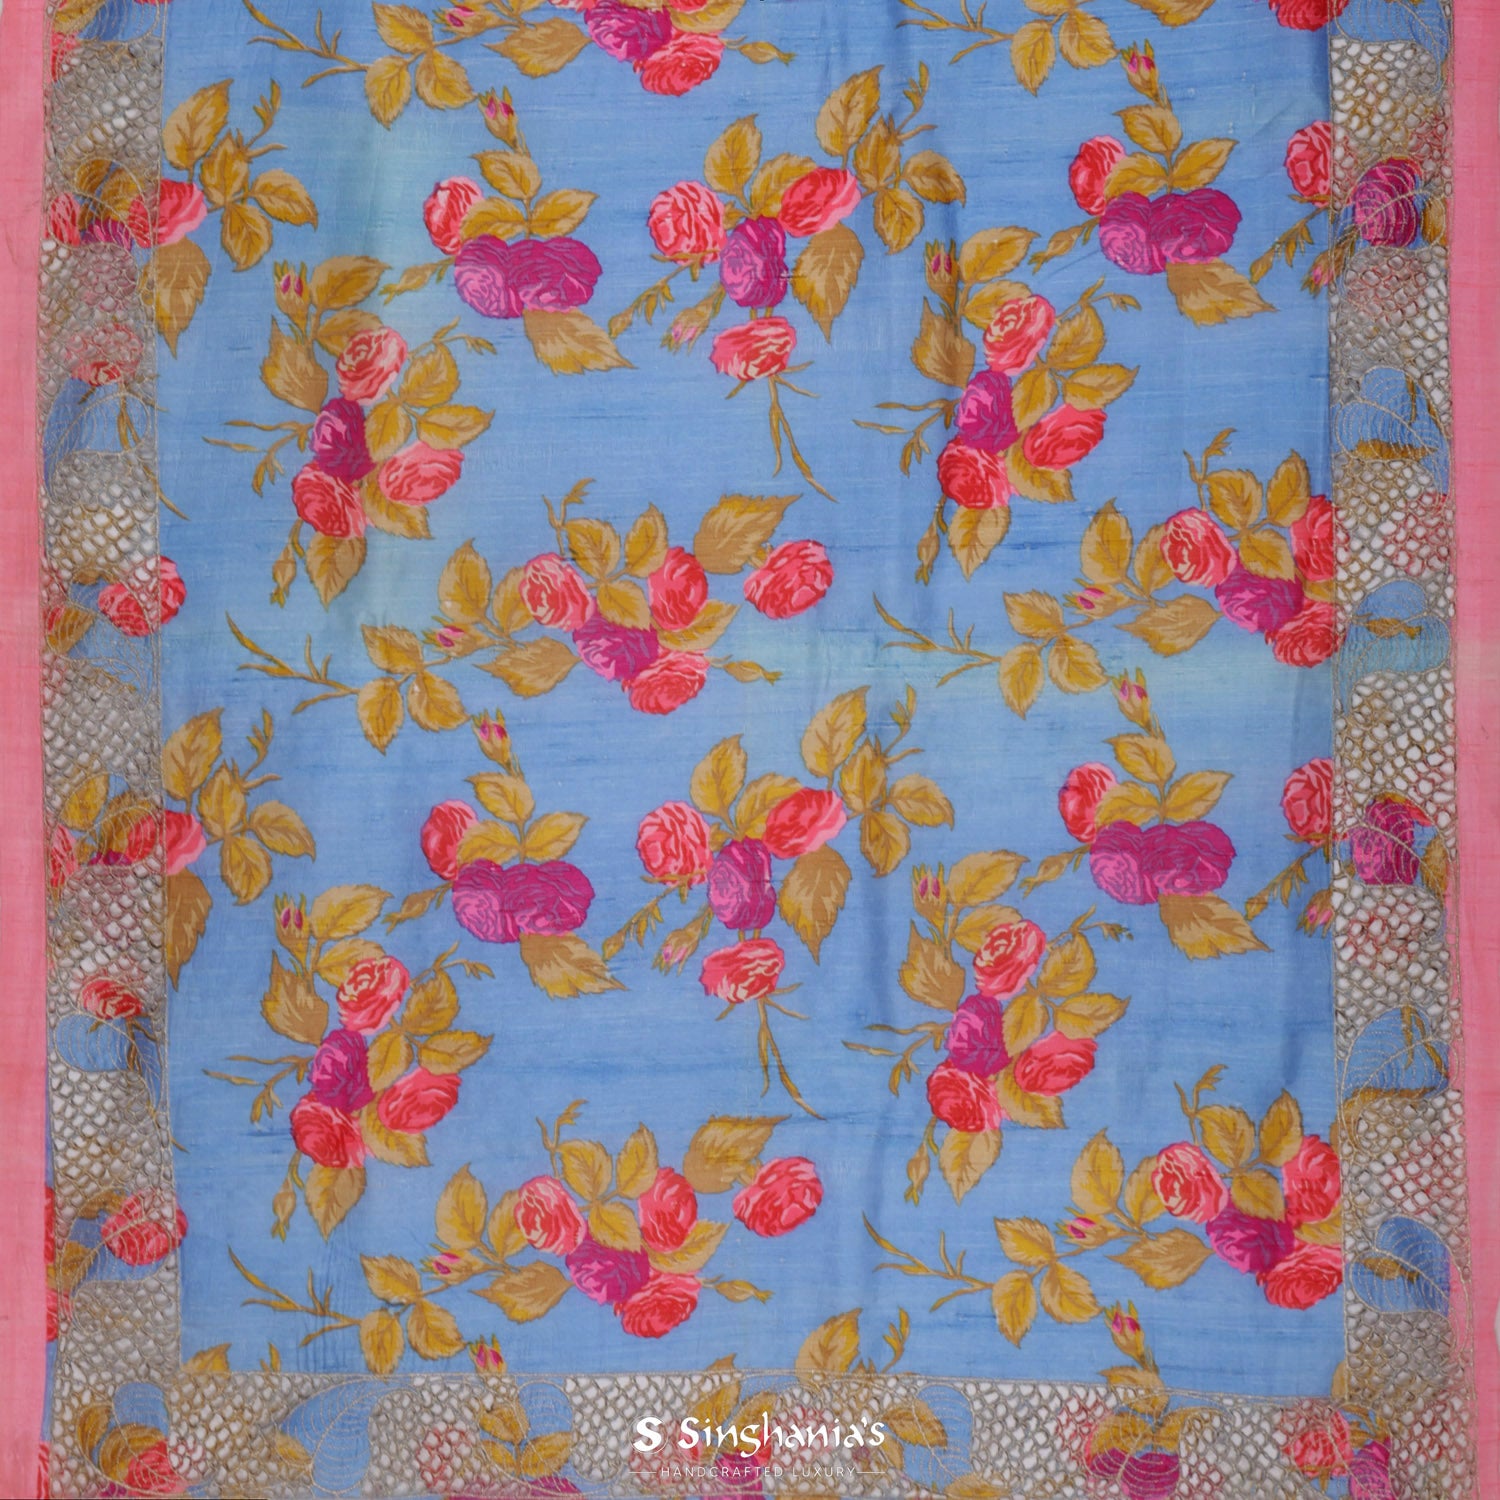 Baby Blue Printed Dupion Saree With Floral Pattern